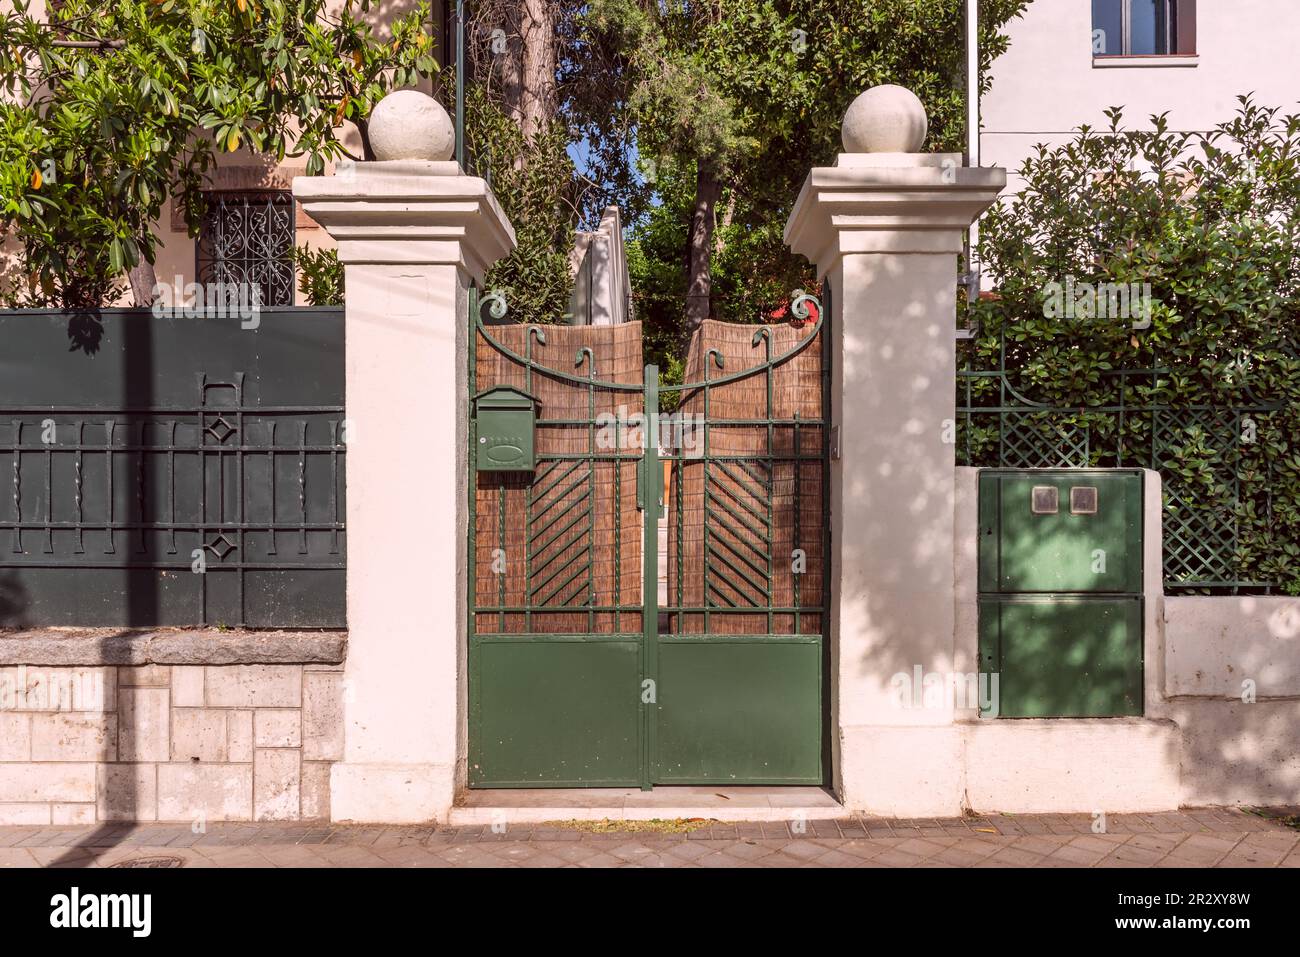 Portal of an urban single-family house with a metal fence with dark green painted wrought iron works combined with stone, hedges and trees Stock Photo